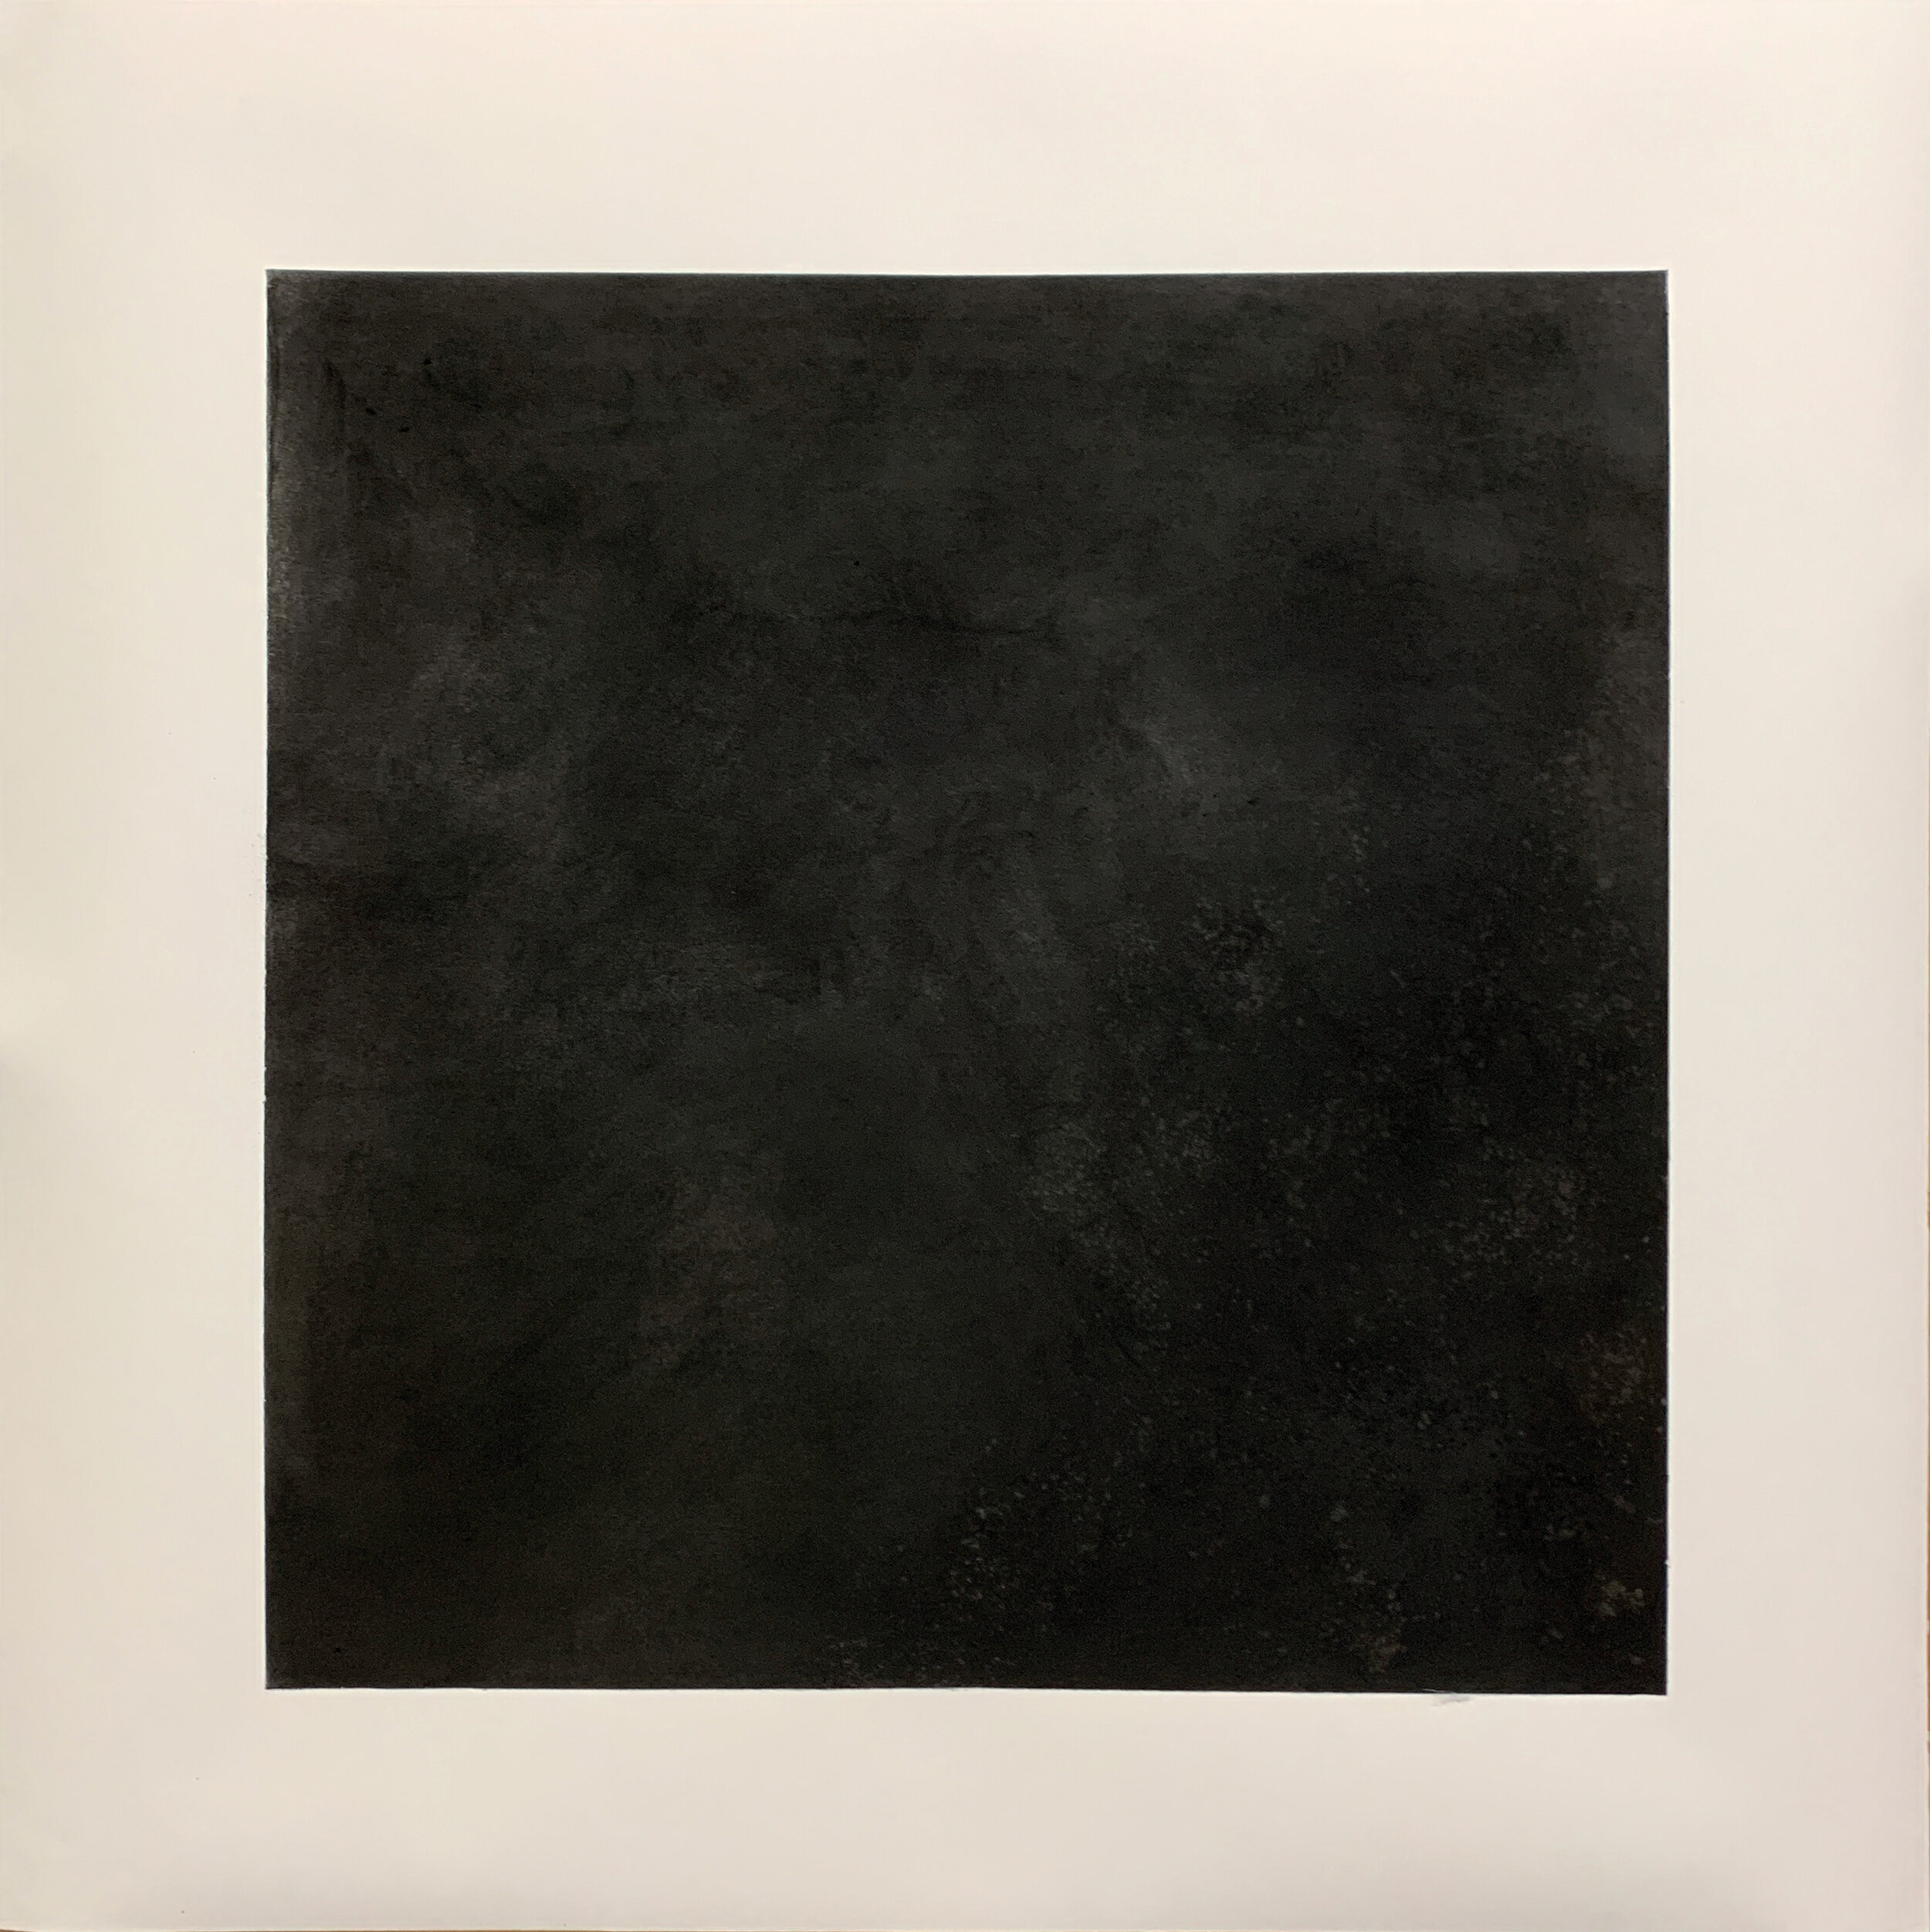 ‘Black Square’ (After Kasimir Malevich) 1915